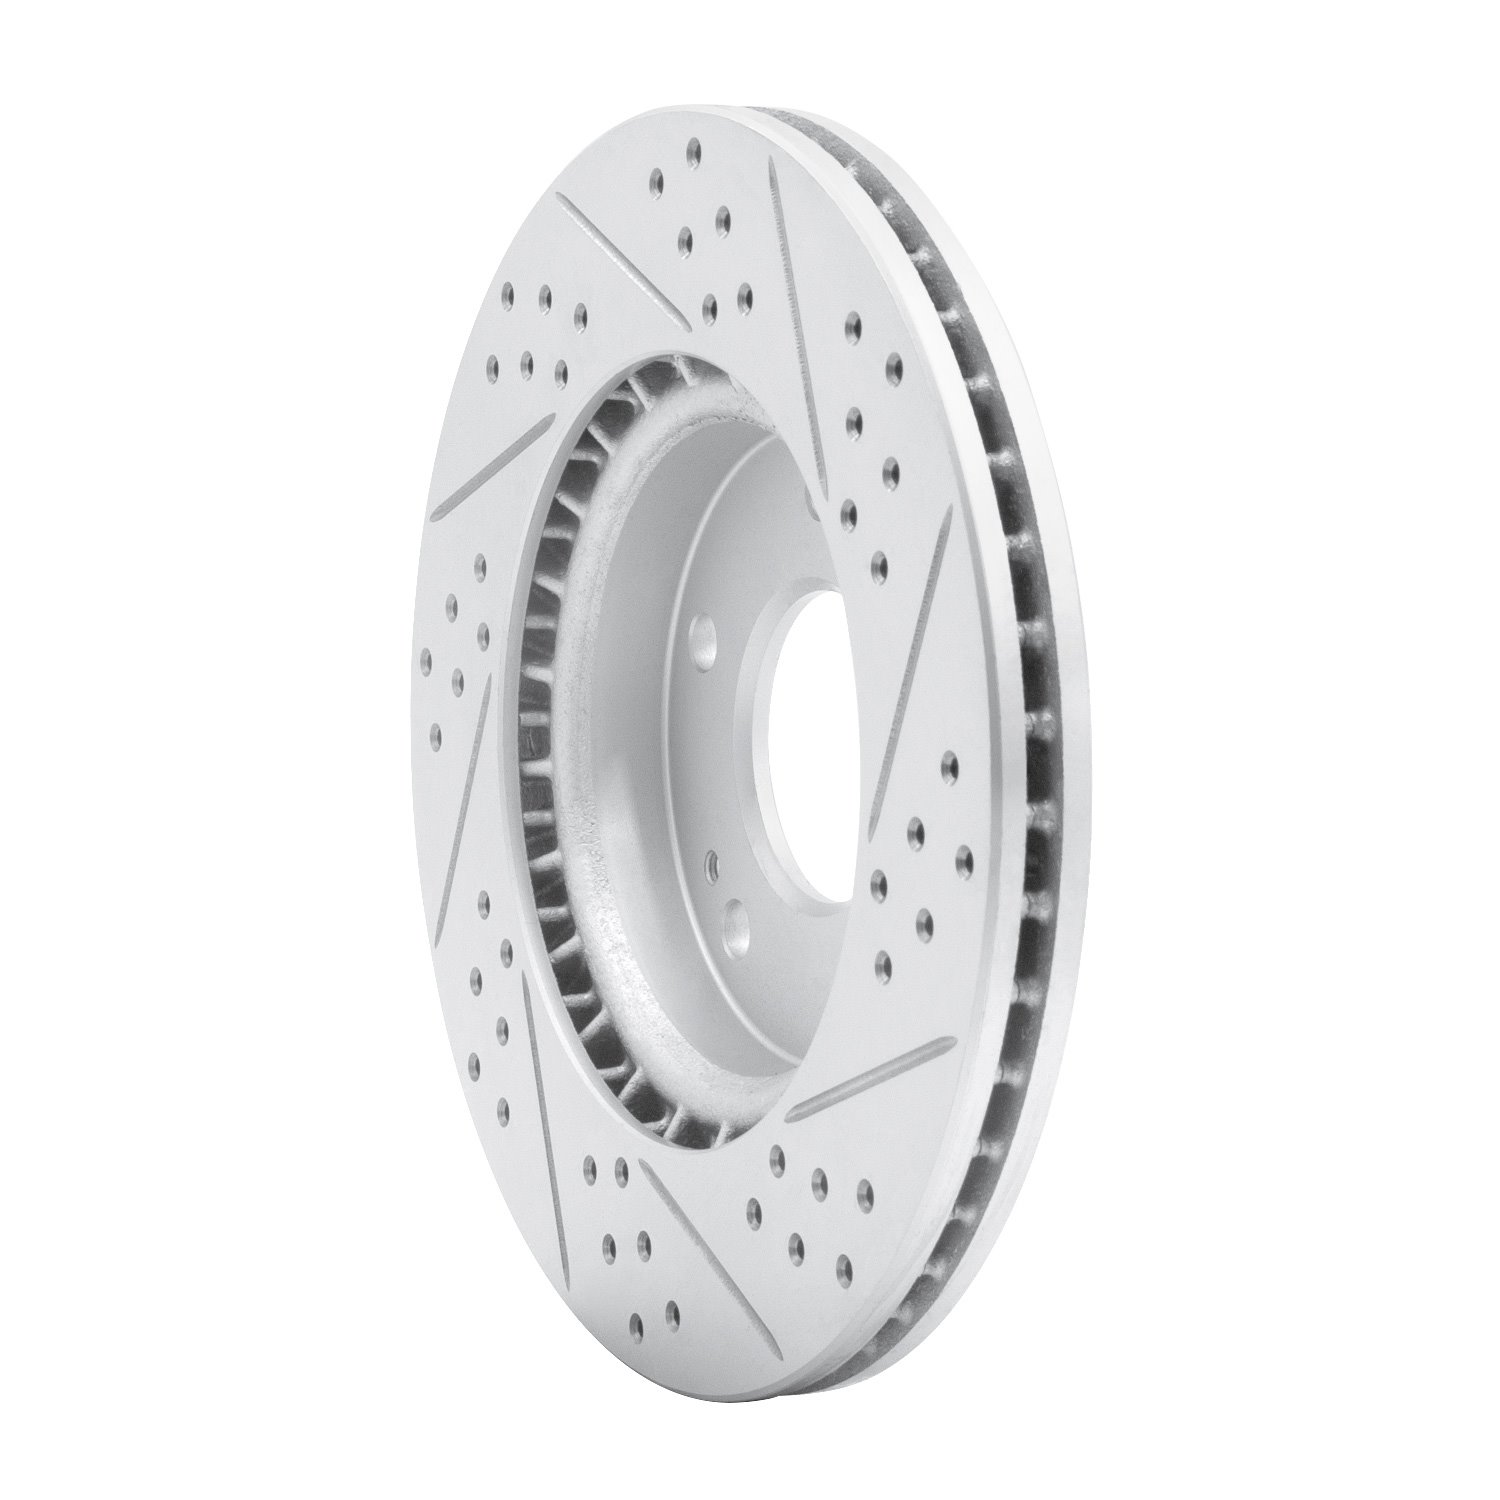 830-03038L Geoperformance Drilled/Slotted Brake Rotor, Fits Select Kia/Hyundai/Genesis, Position: Front Left